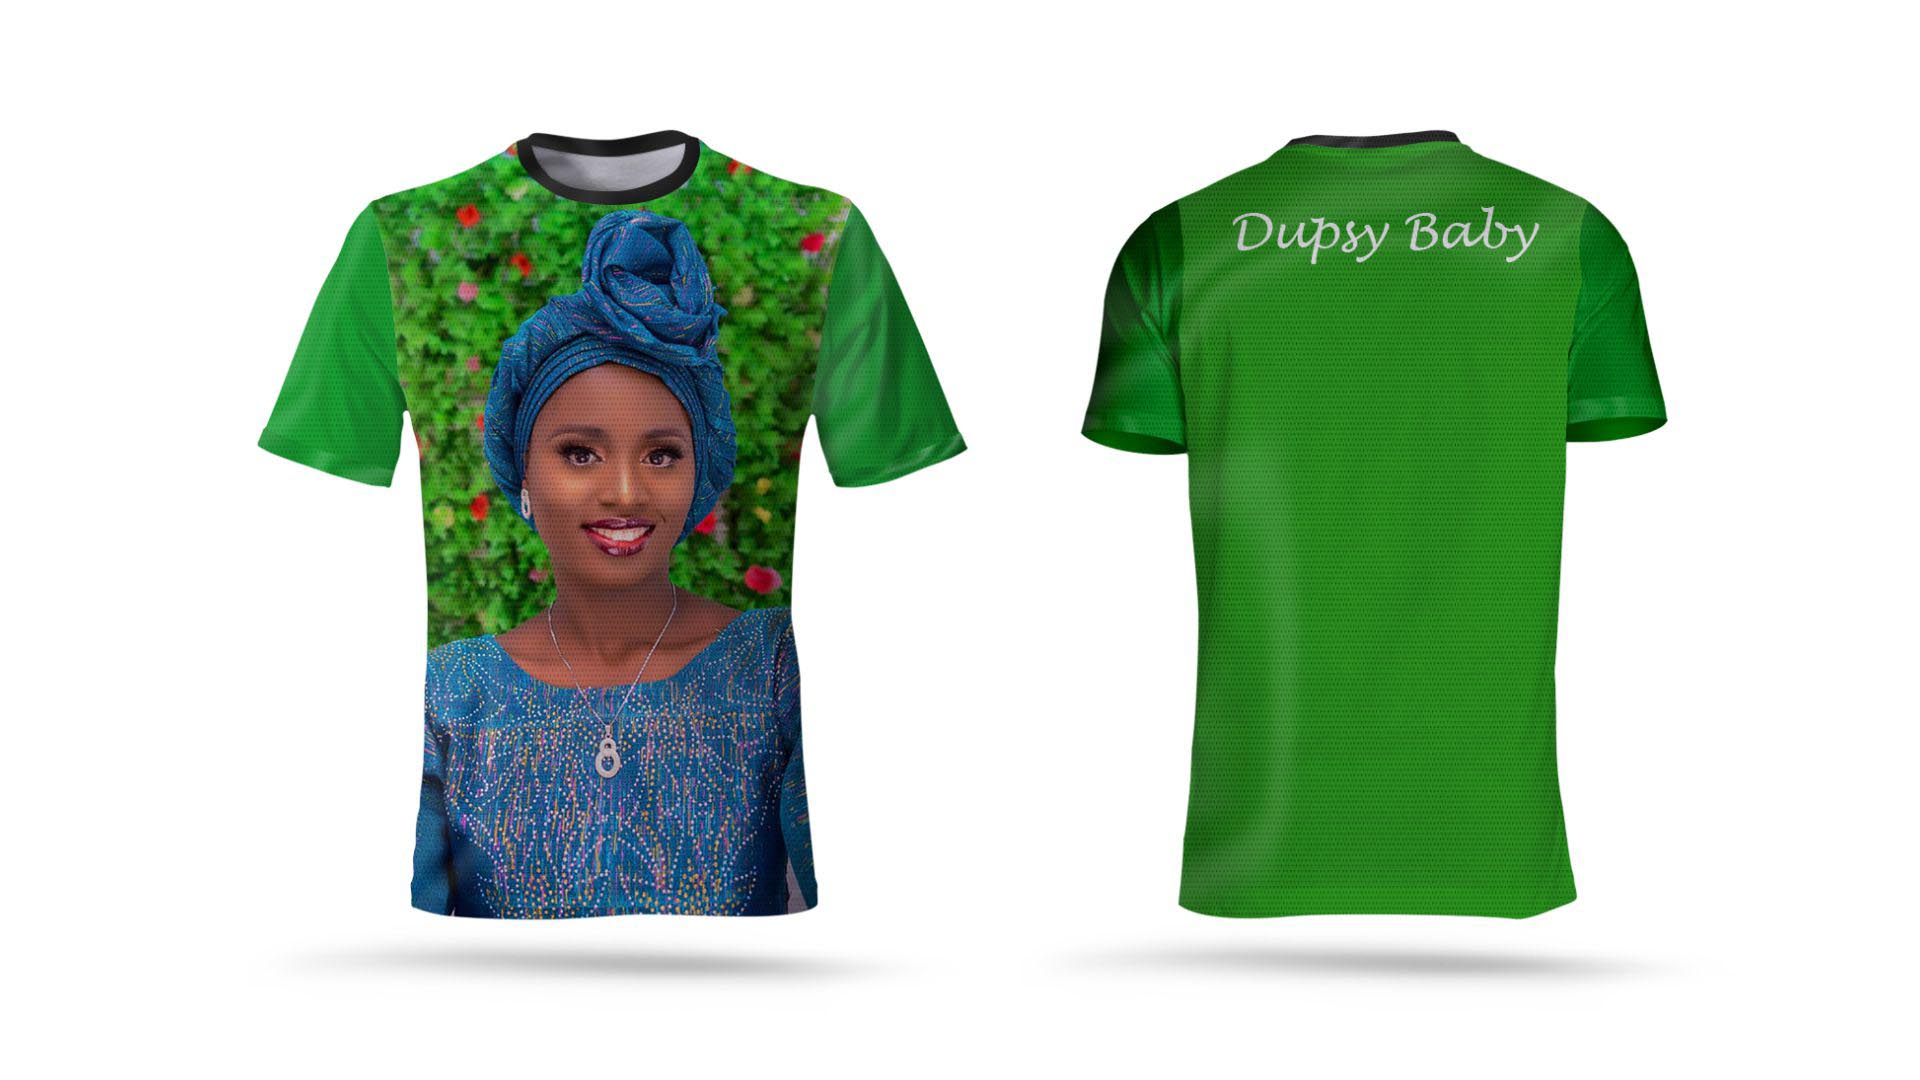 Branded Sublimation T-shirt Printing and Design in Lagos Nigeria